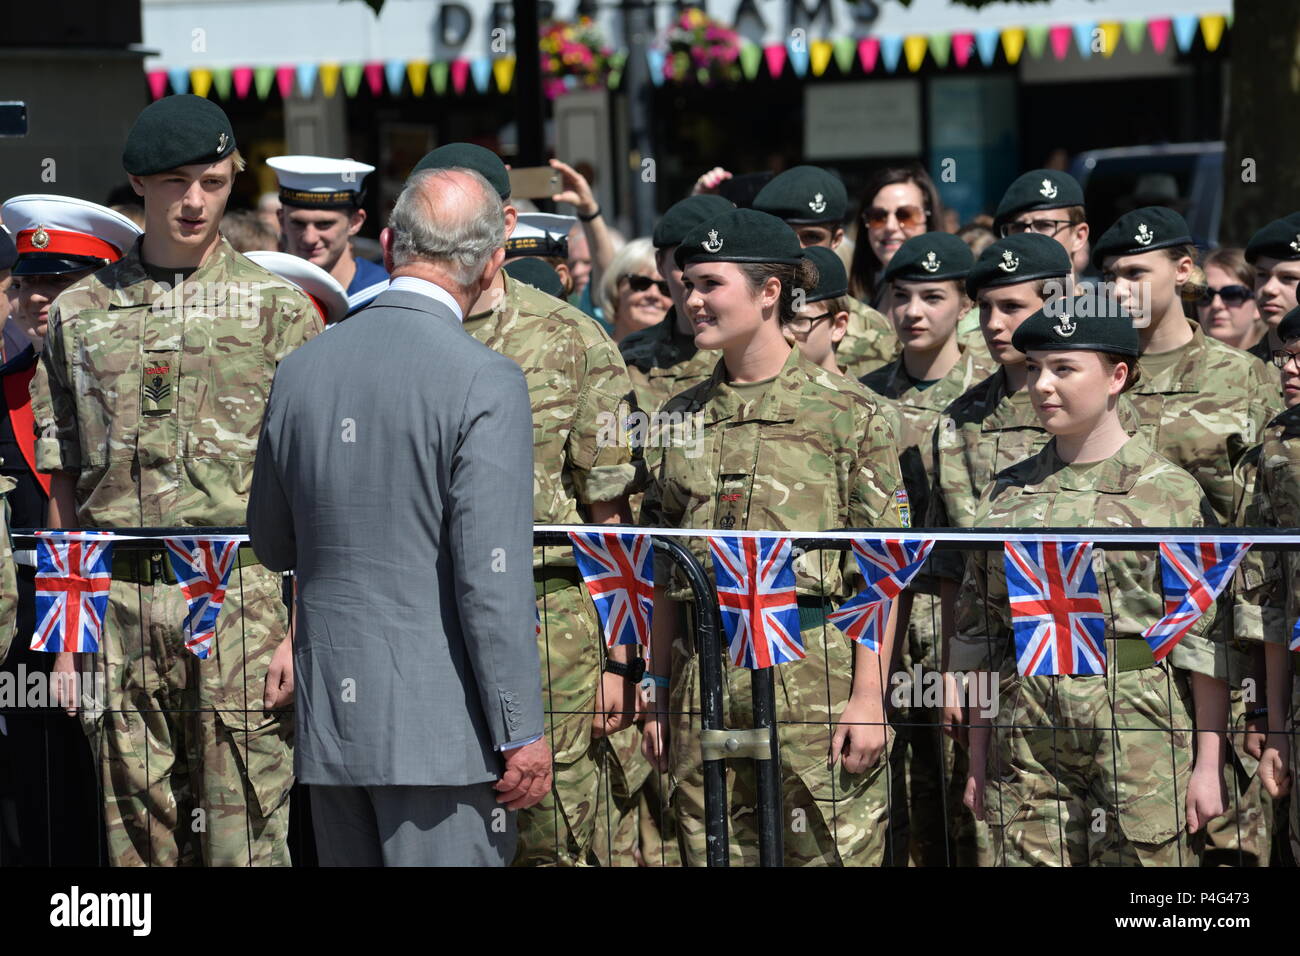 Salisbury, Wiltshire, UK, 22nd June 2018. HRH Prince Charles, the Prince of Wales talking to army personnel in the Market Square. The royal couple are on a visit to Salisbury to support the city’s recovery where visitor numbers have fallen and businesses suffered after the nerve agent attack on former Russian spy Sergei Skripal and his daughter Yulia on March 4th 2018. Stock Photo